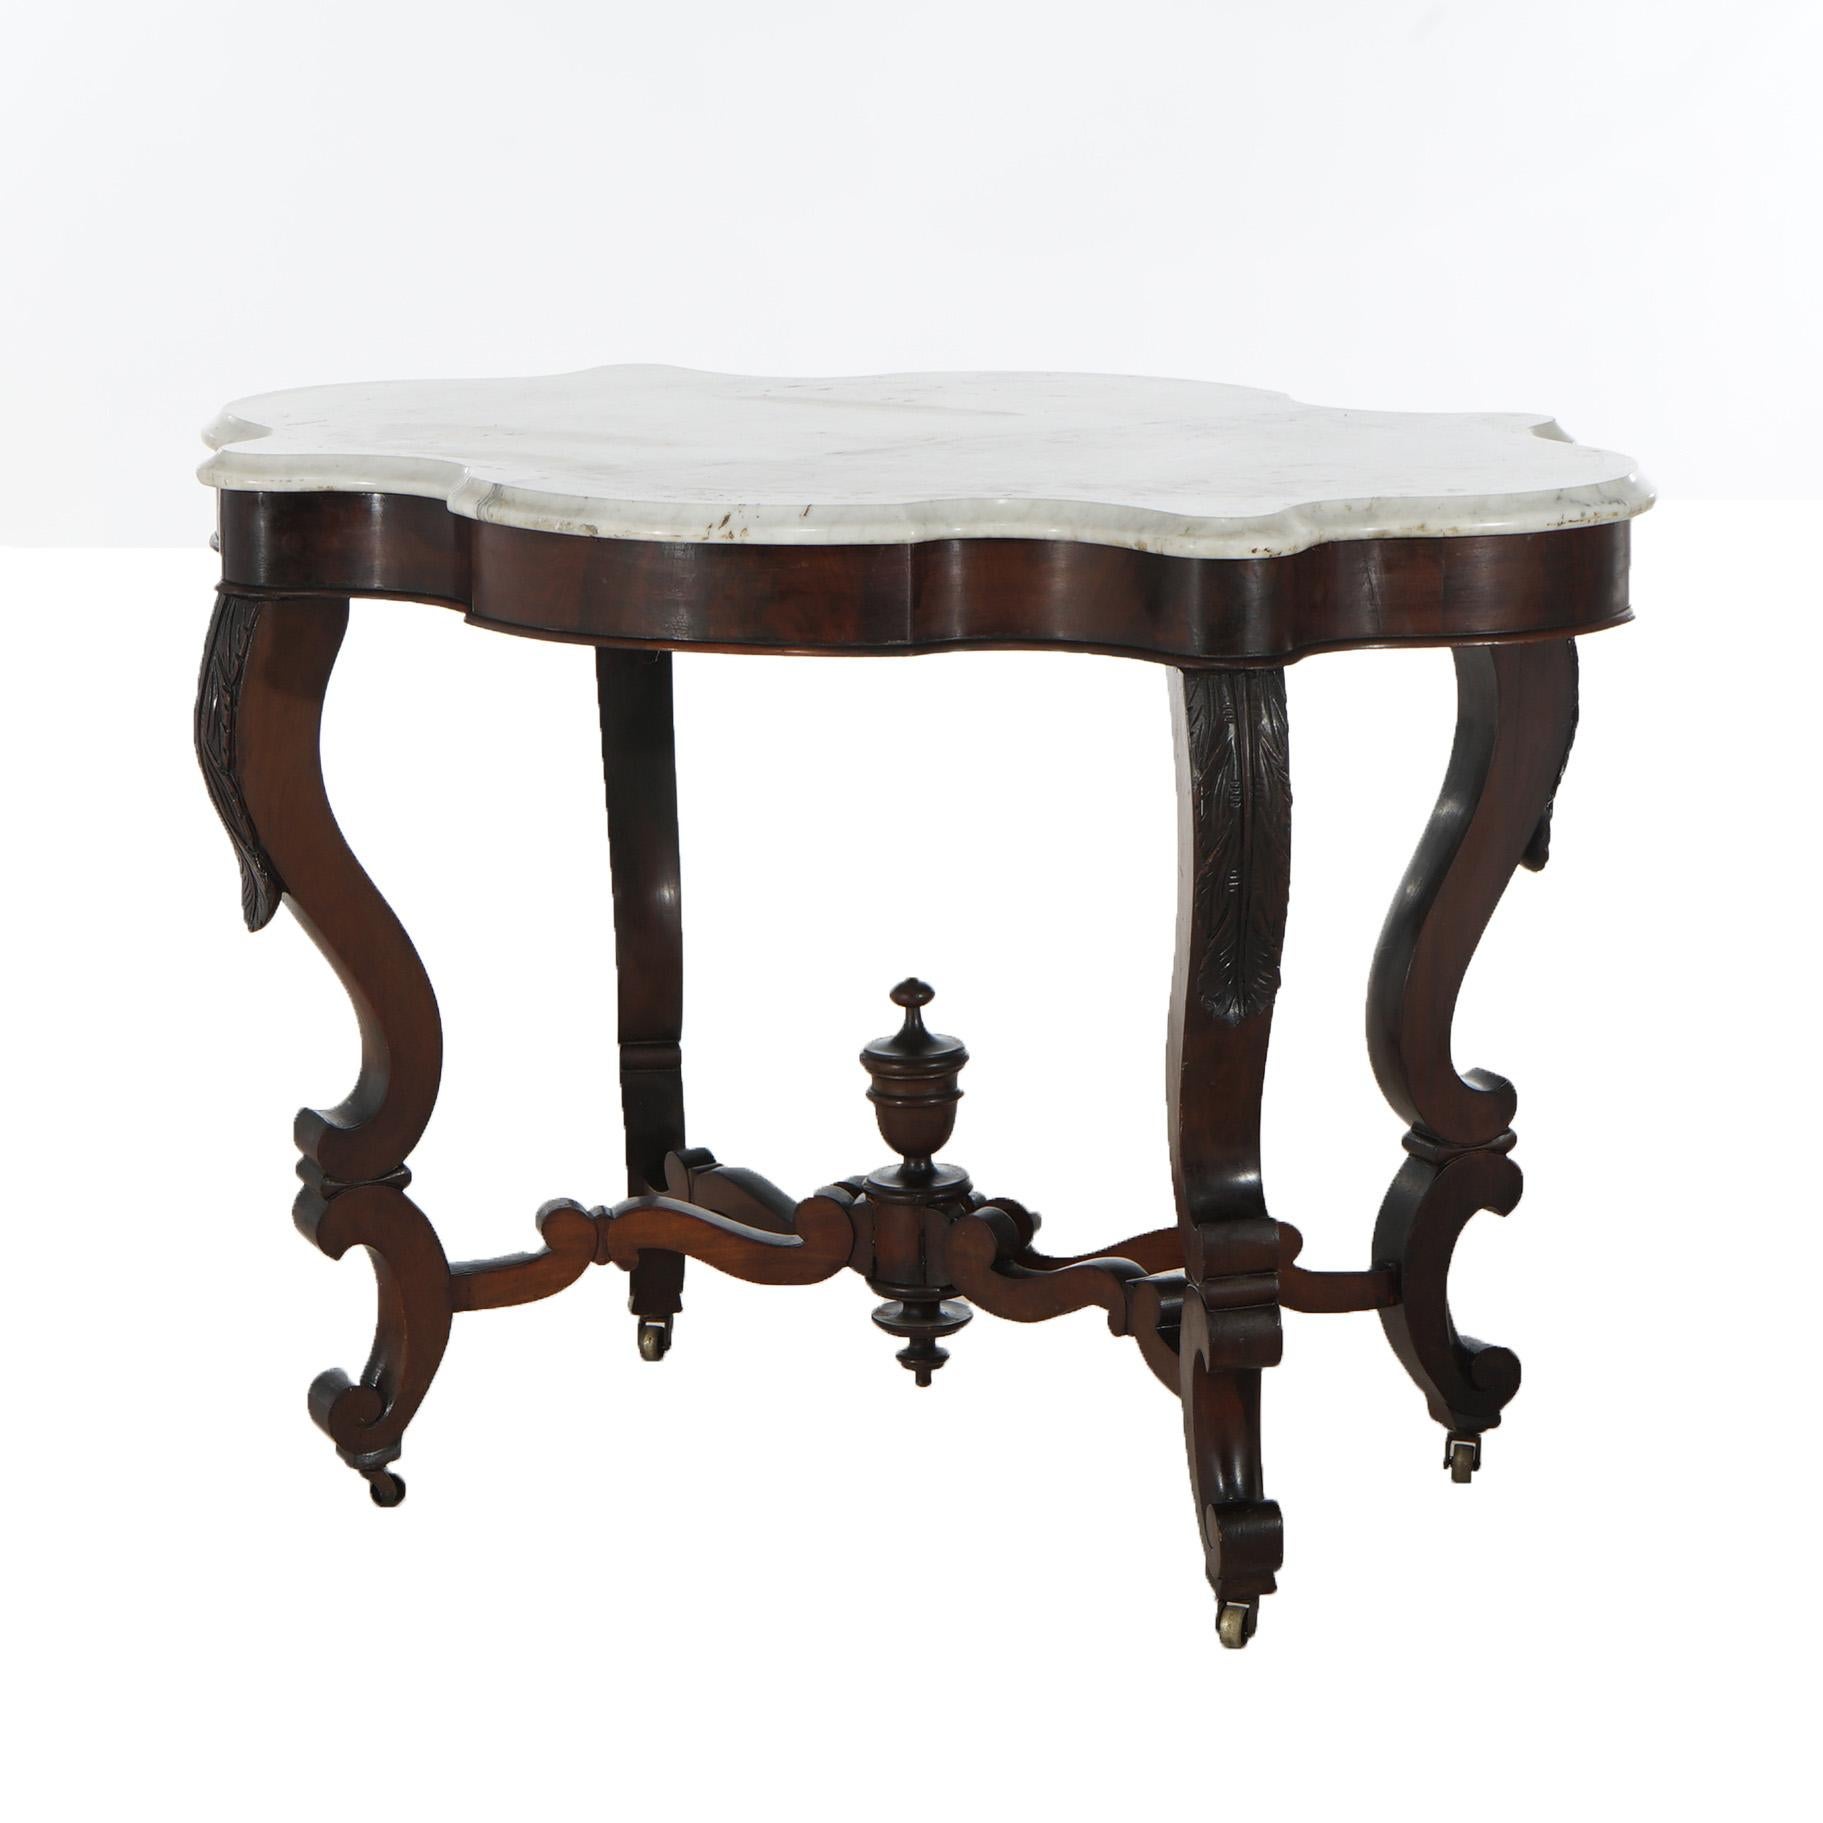 Antique Victorian Foliate Carved Walnut & Beveled Marble Turtle Top Parlor Table with Cabriole Legs and Central Urn, C1890

Measures - 29